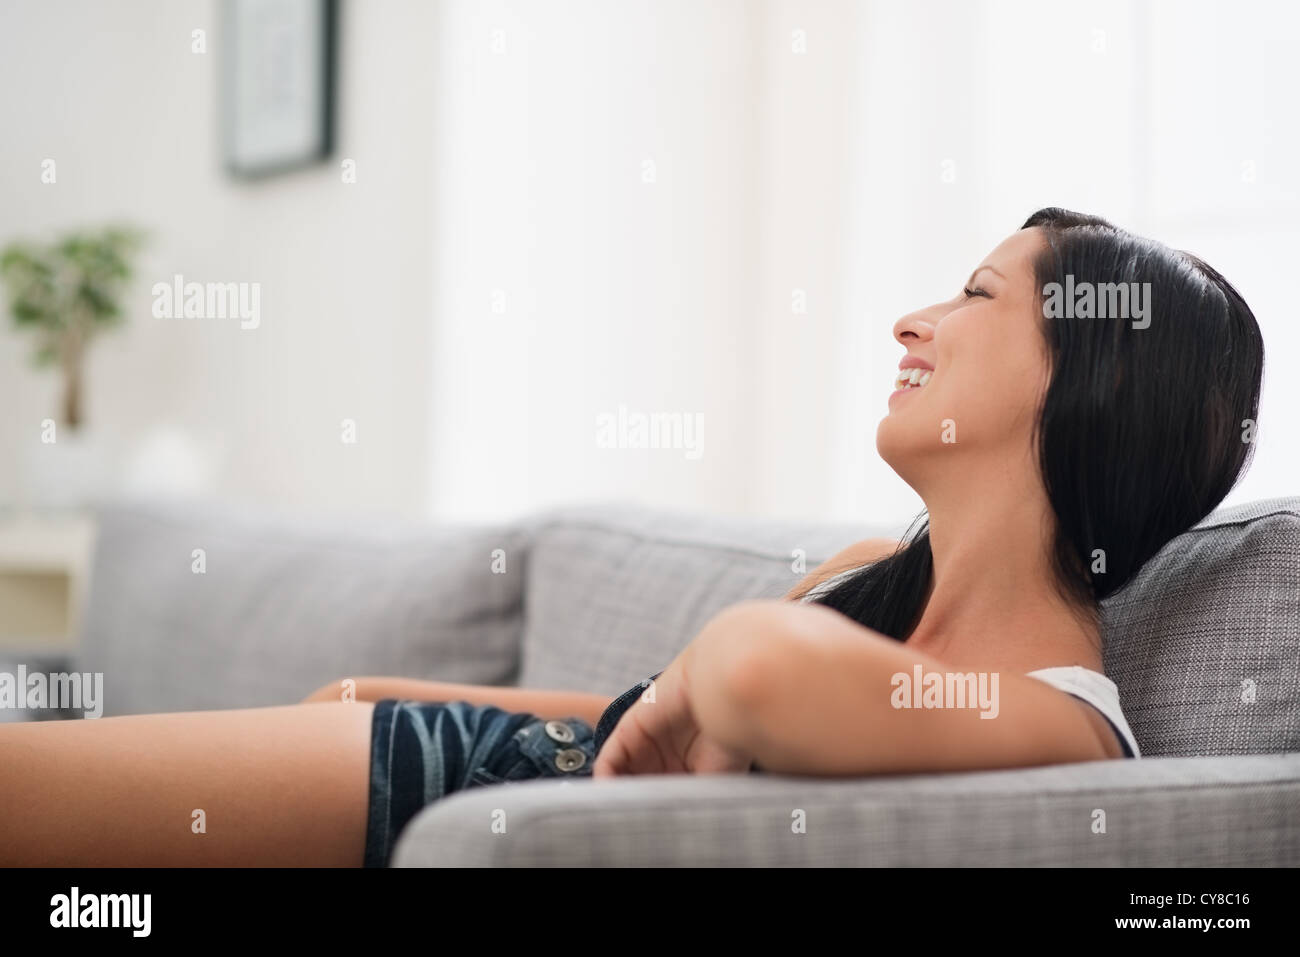 Smiling young woman laying on sofa Stock Photo